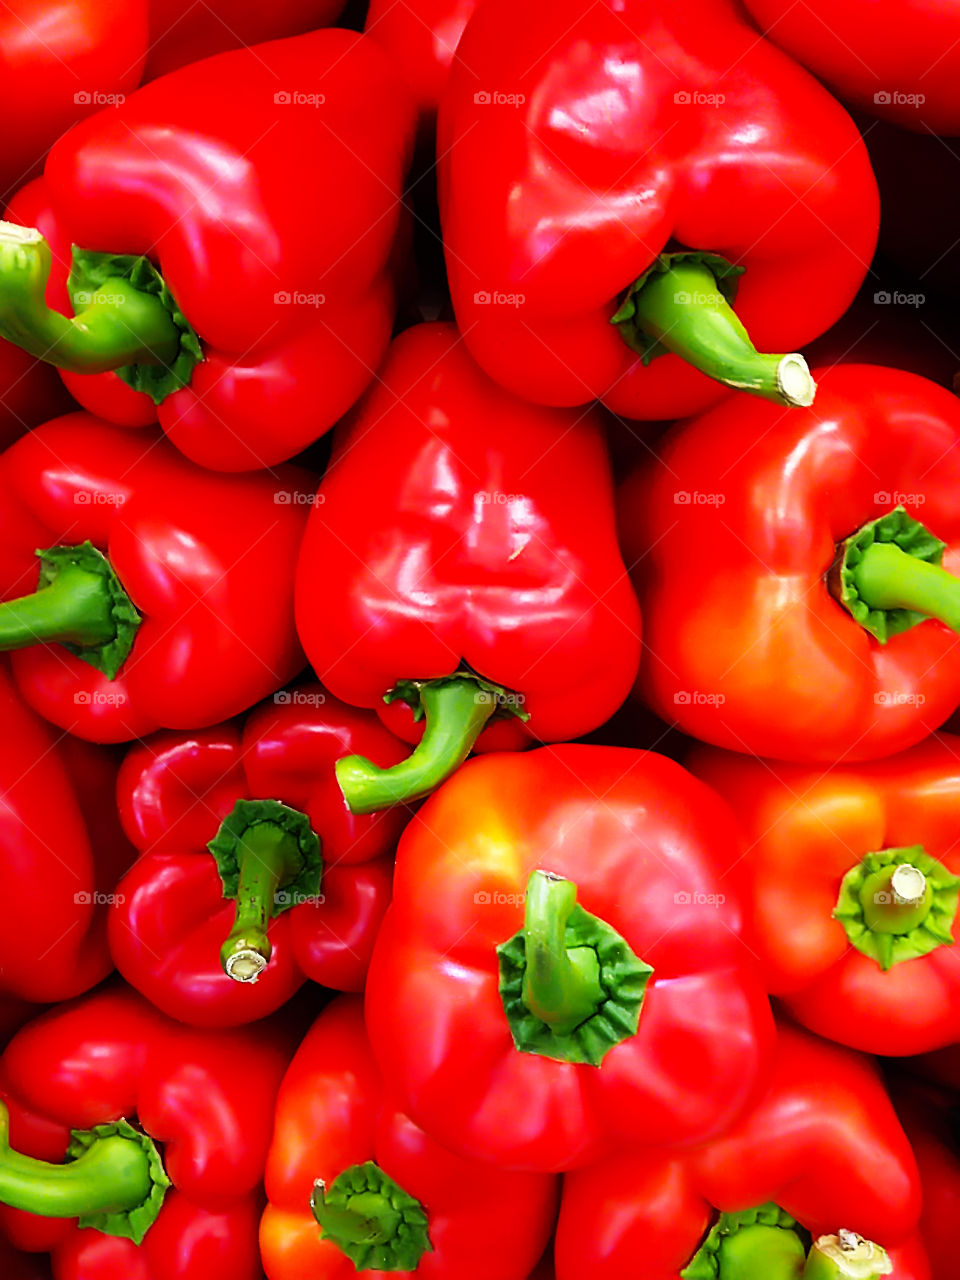 Natural background made of many Red ripe sweet peppers with green peduncles 